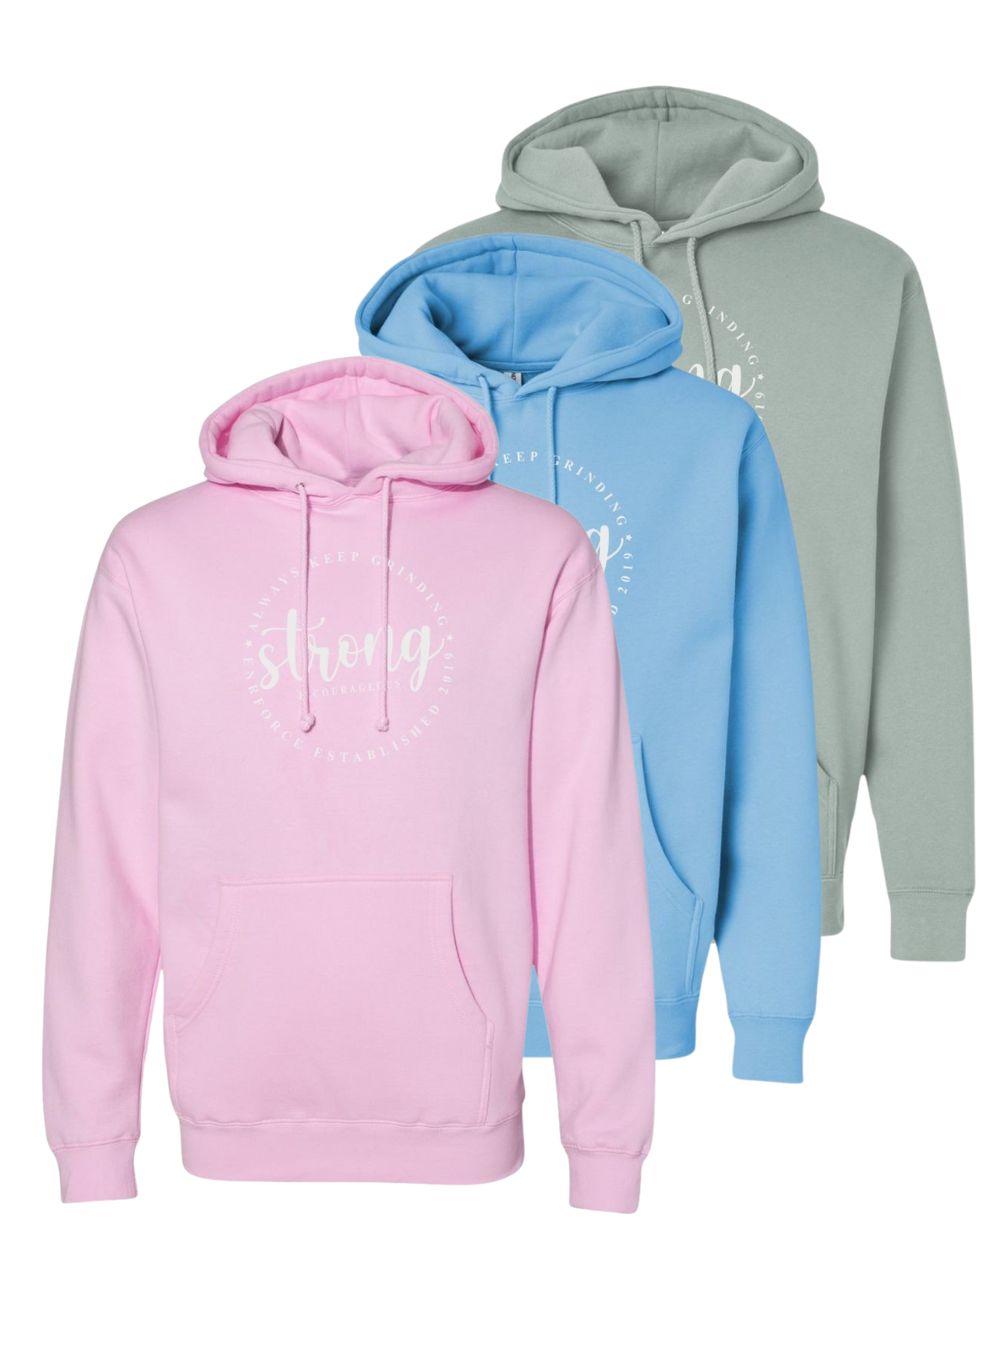 Ladies Strong & Courageous Hoodie